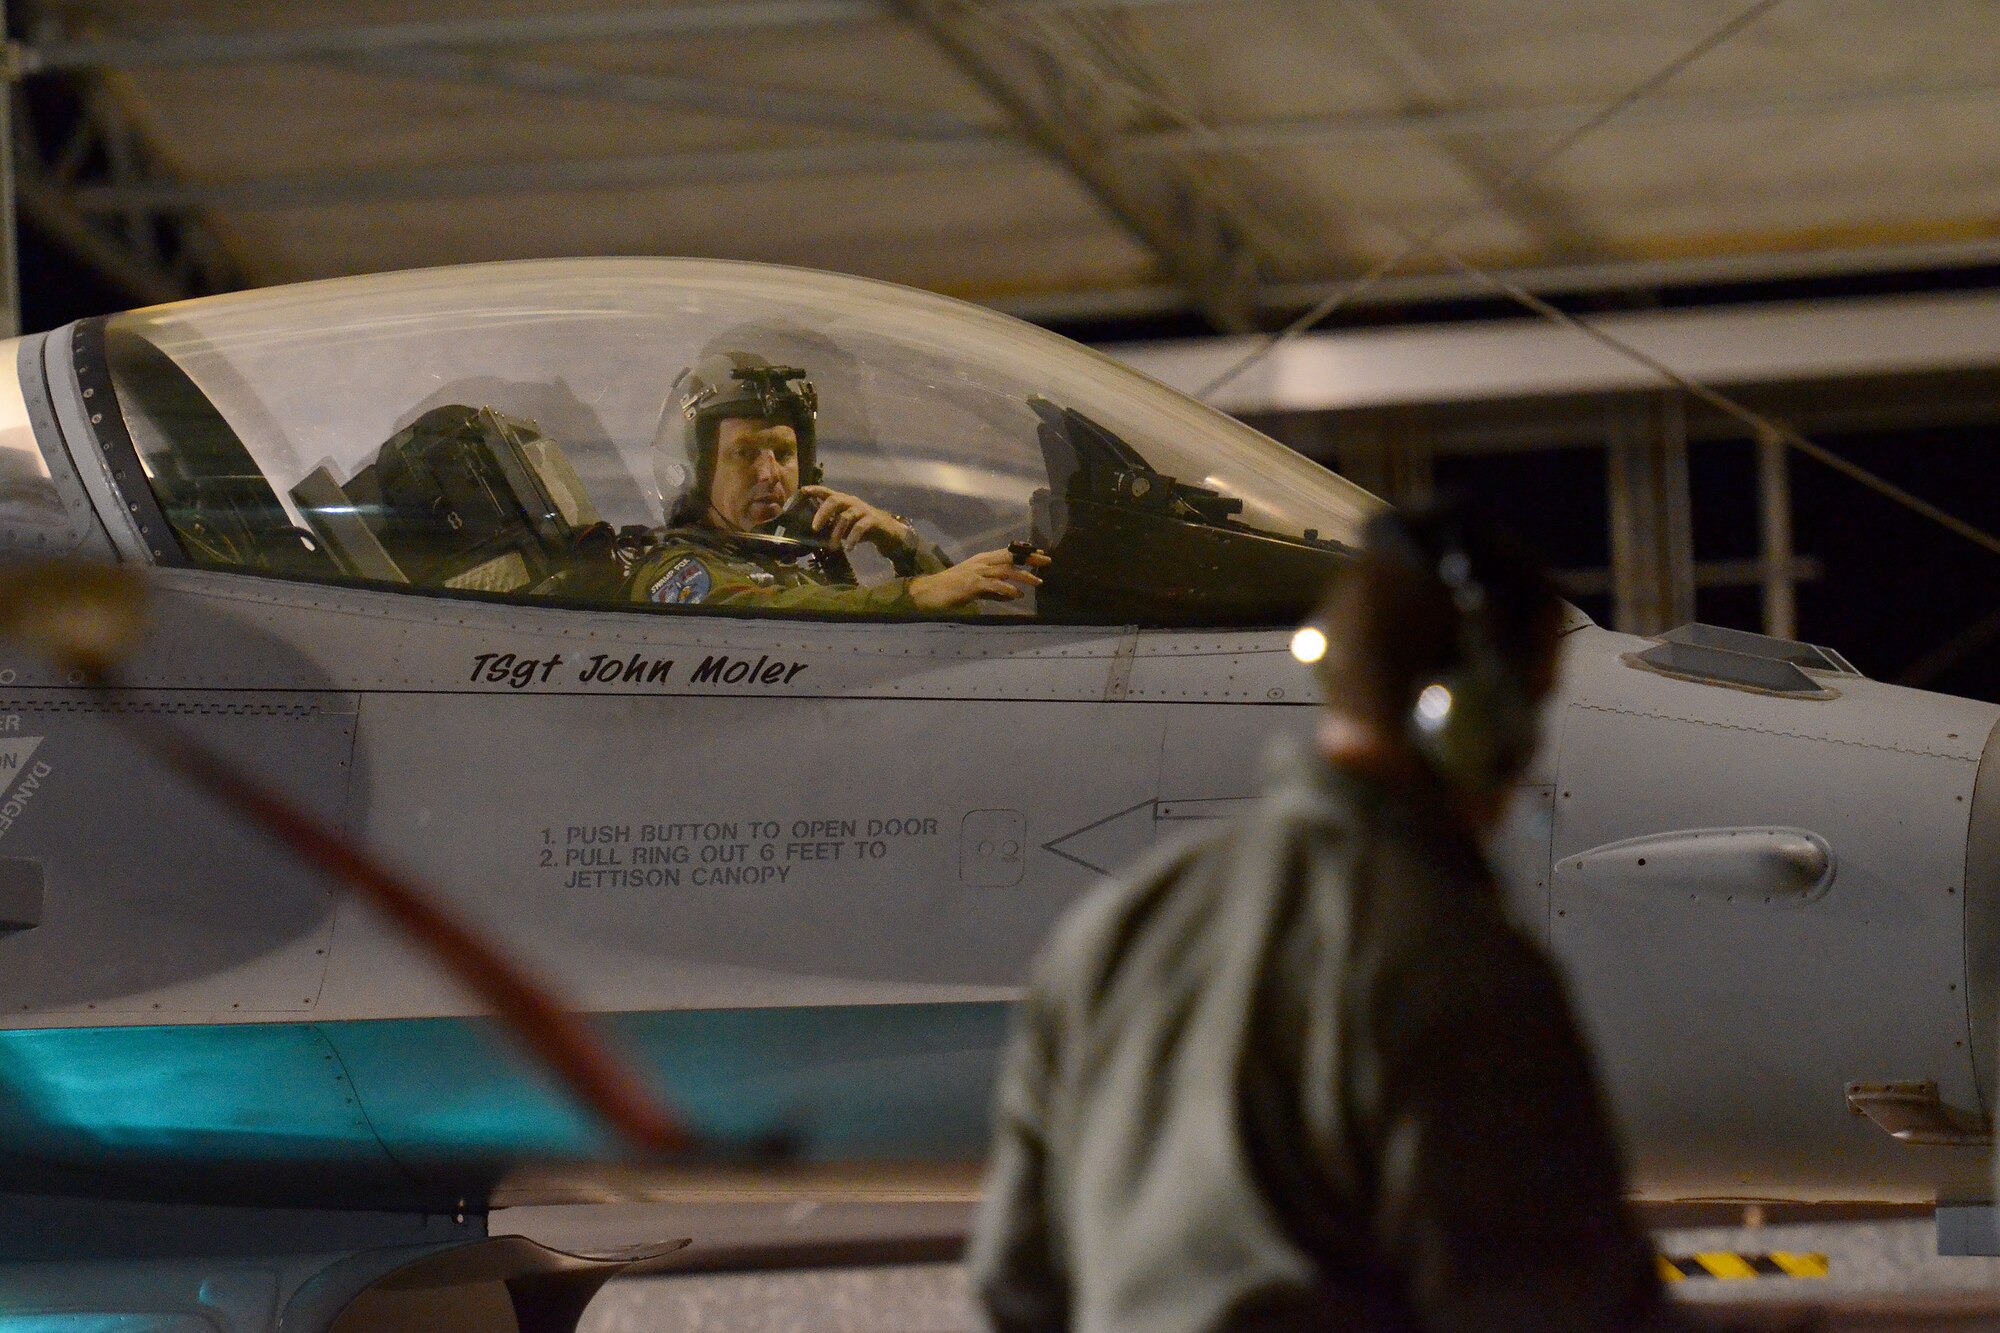 U.S. Air Force Lt. Col. Brent Allen, a fighter pilot assigned to the 157th Fighter Squadron at McEntire Joint National Guard Base, South Carolina Air National Guard, prepares to launch an F-16 Fighting Falcon for a night training mission during surge flying operations Feb. 7, 2015. The surge encompasses high tempo flying as part of vital training for deployments. (U.S. Air National Guard photo by Airman 1st Class Ashleigh S. Pavelek/Released)